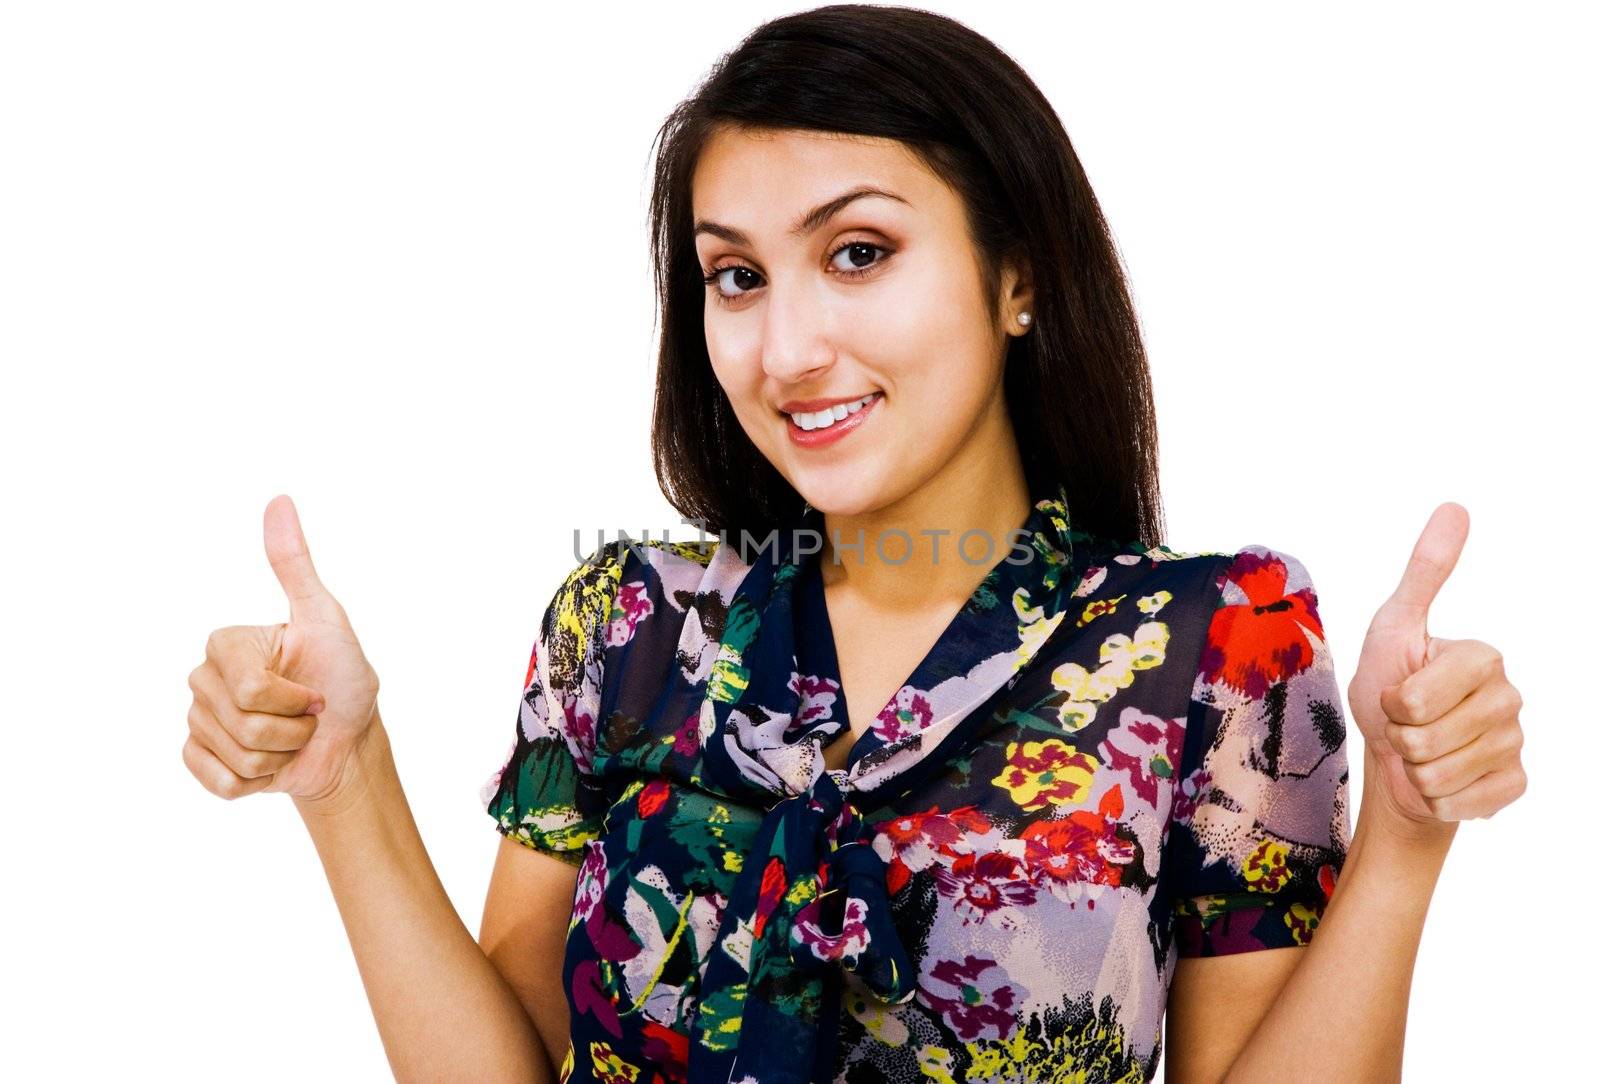 Confident woman showing thumbs-up sign and smiling isolated over white